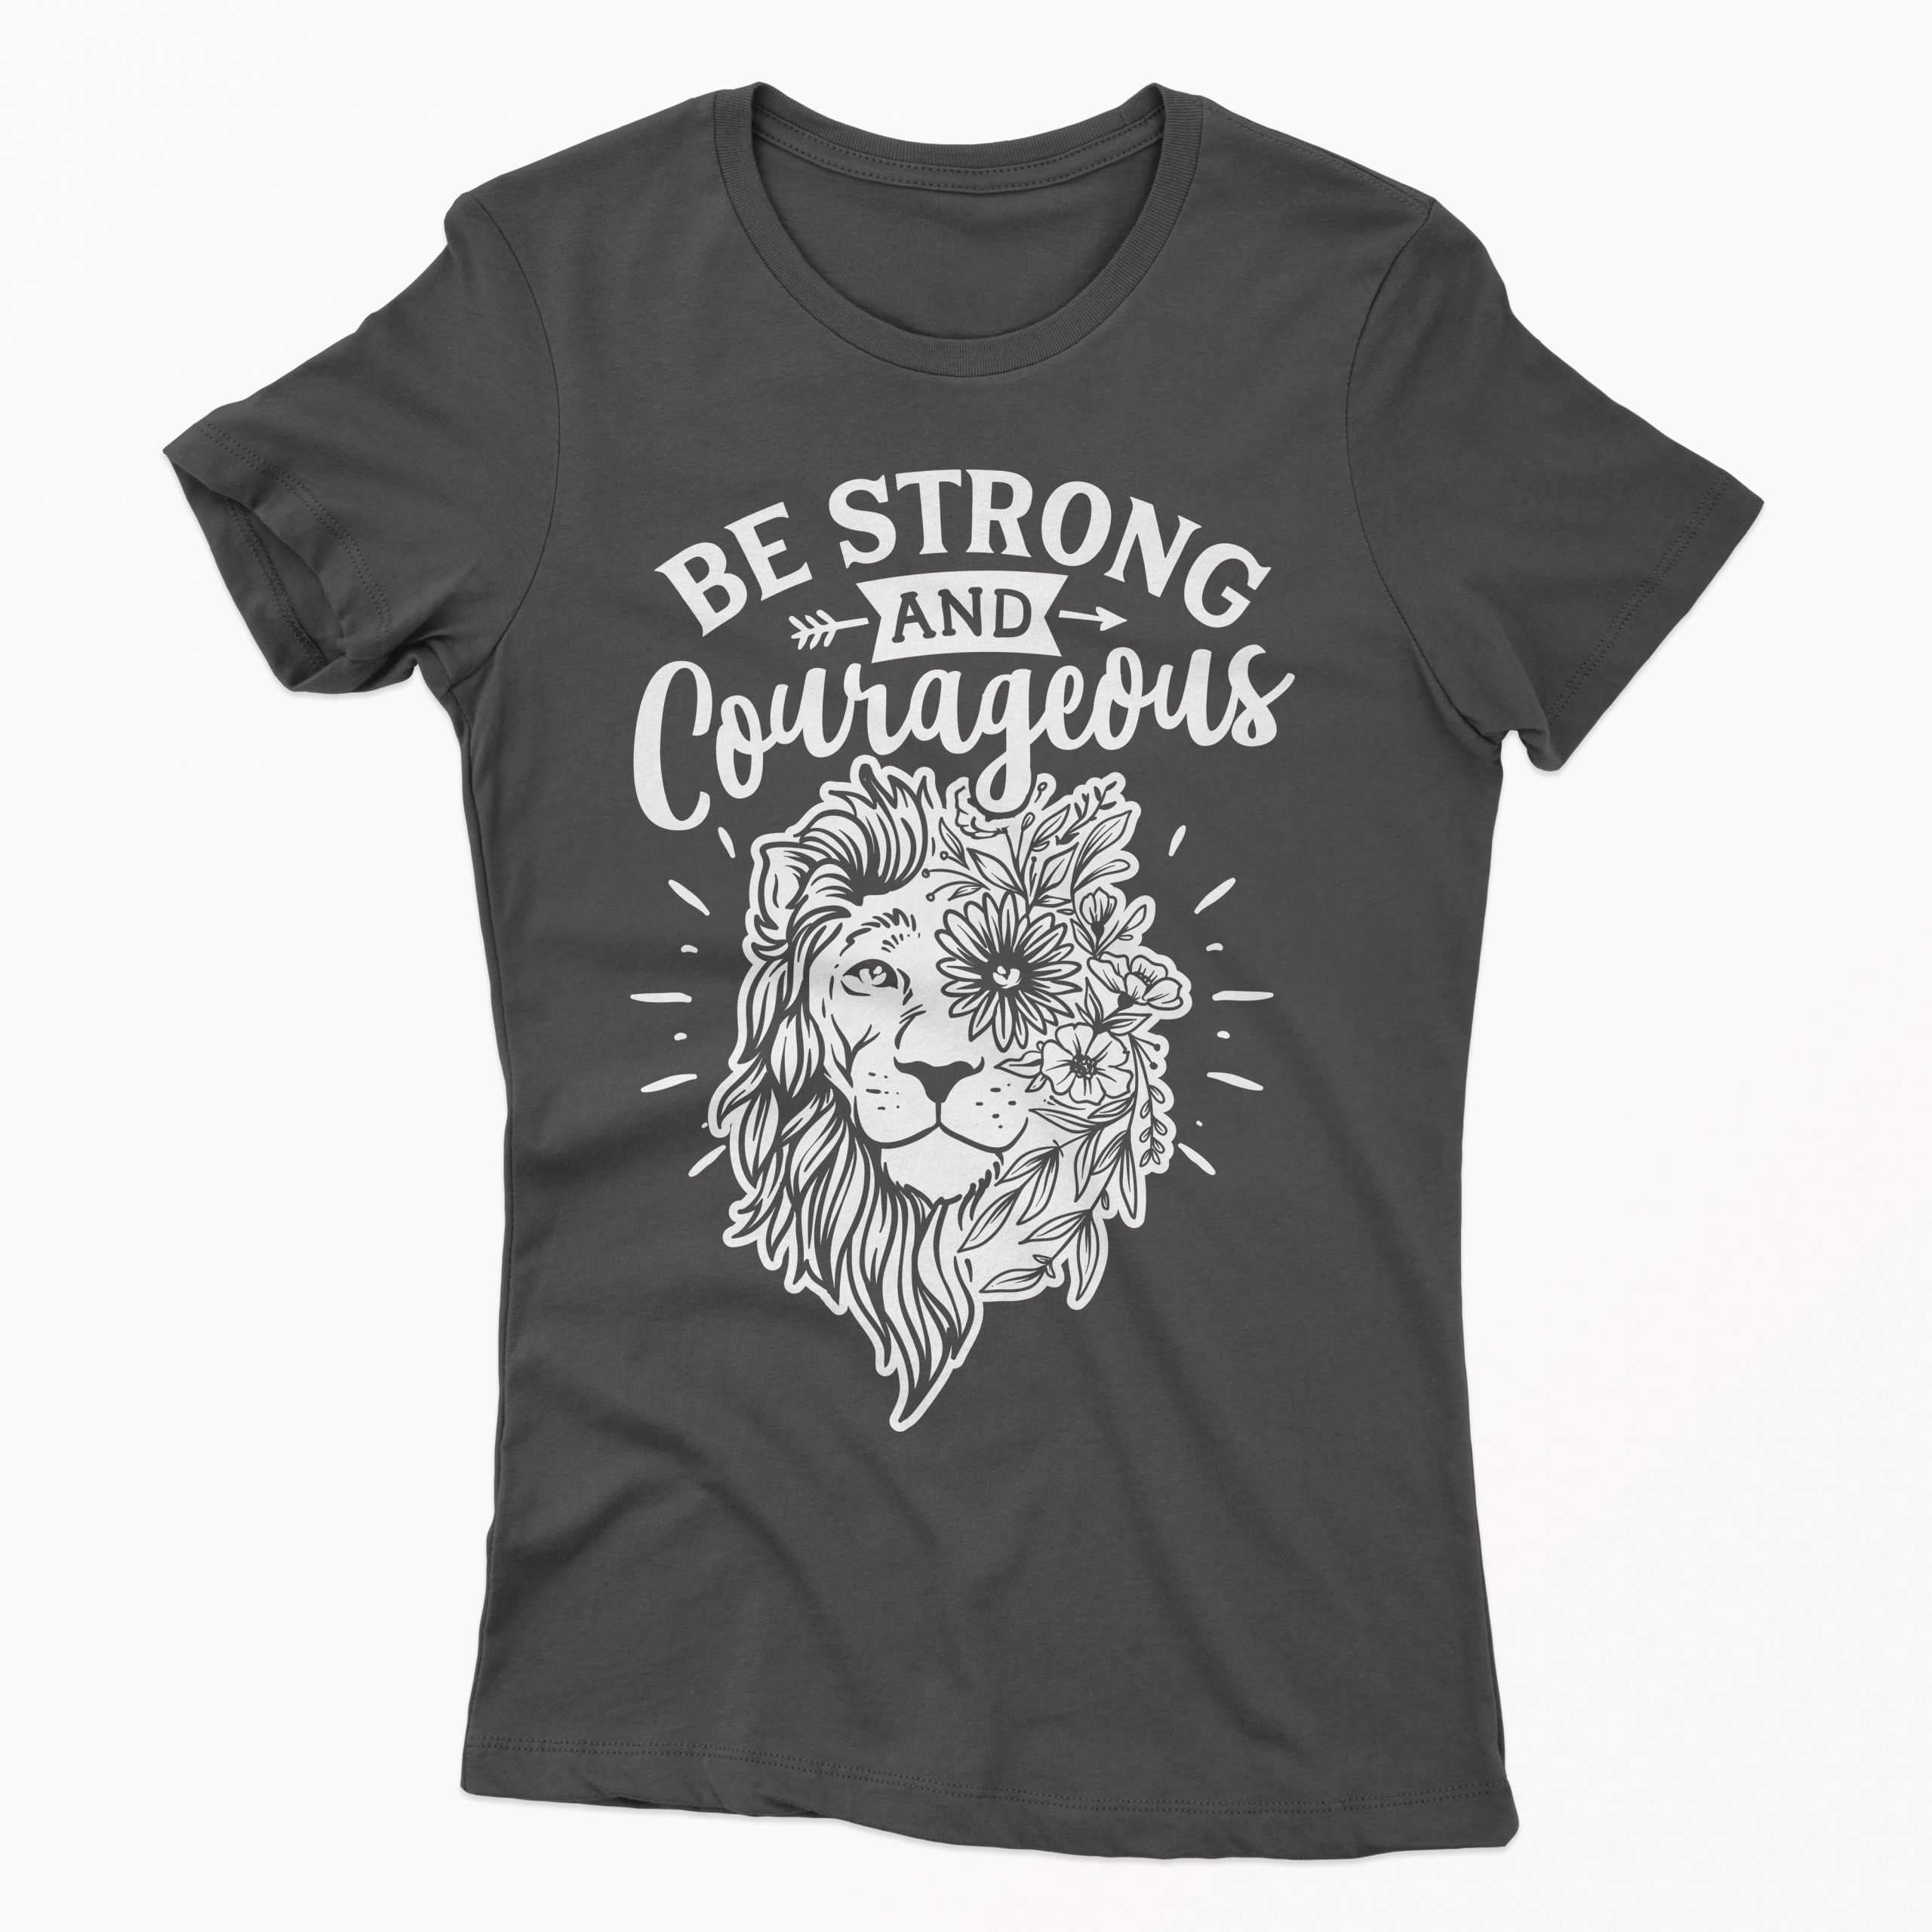 Be strong and courageous - Print Shop | Mitalex